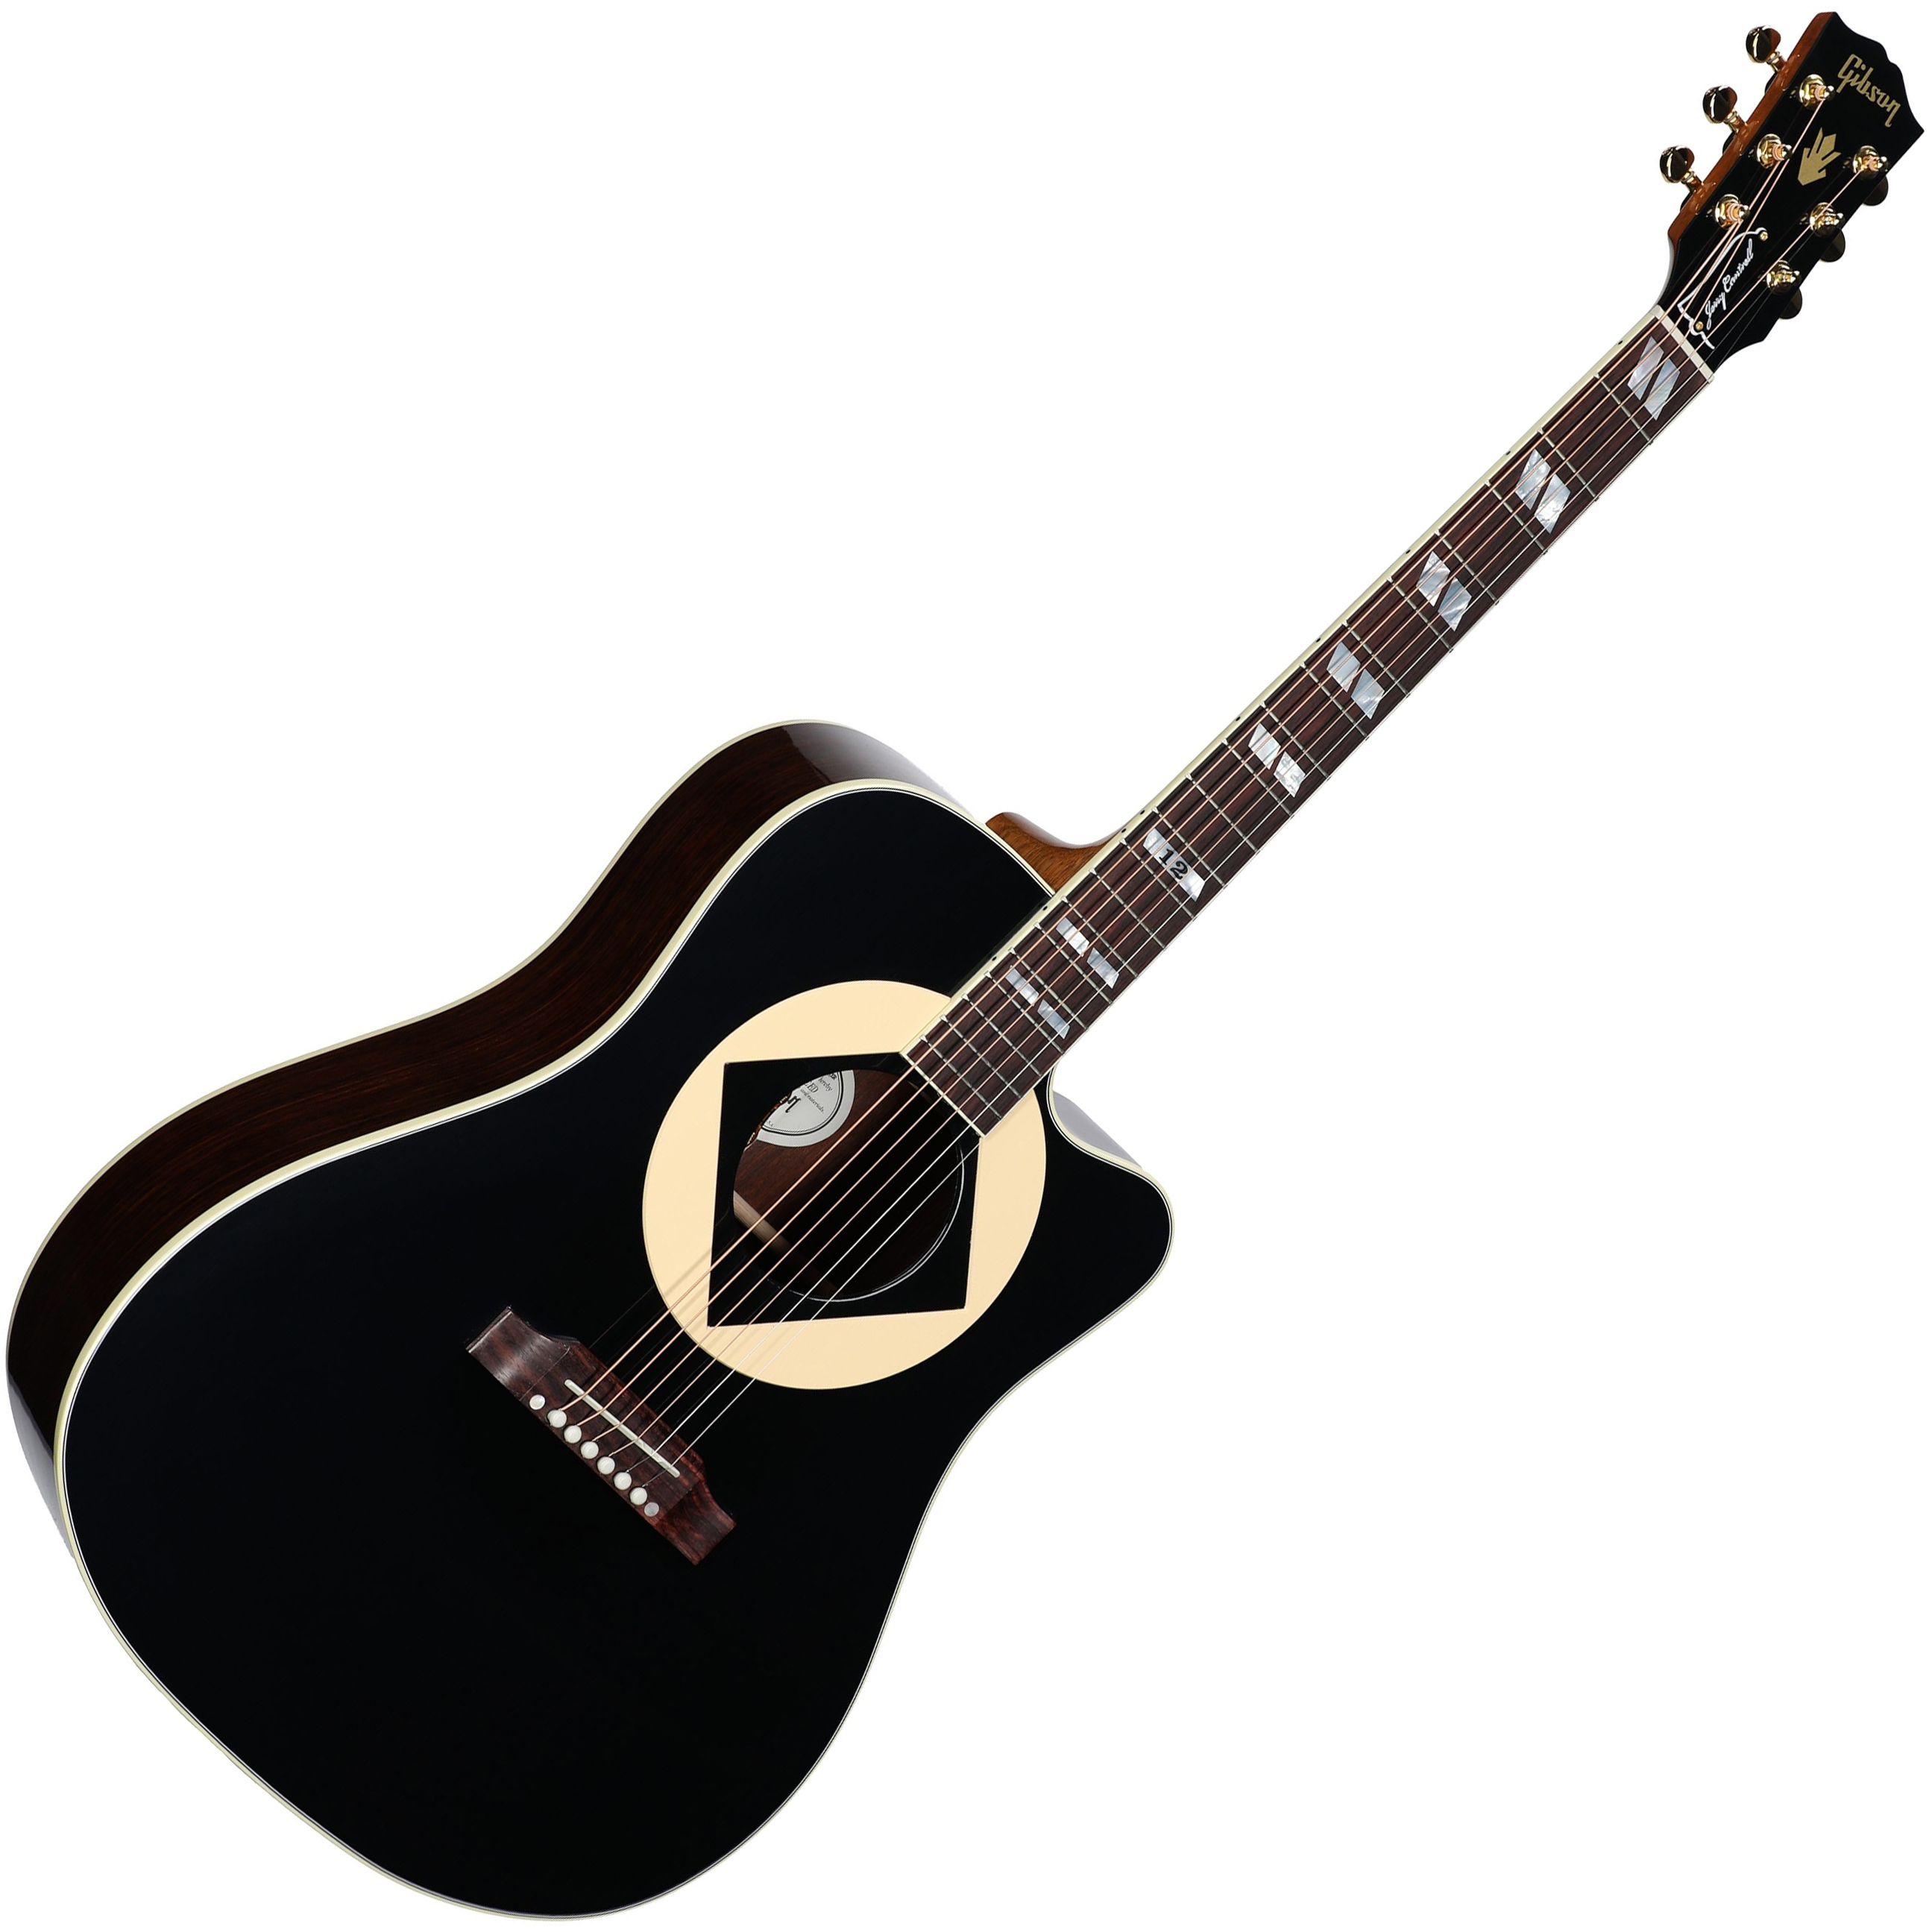 Gibson Jerry Cantrell Songwriter Atone Signature Dreadnought Cw Epicea Palissandre Rw - Ebony - Guitare Acoustique - Variation 1